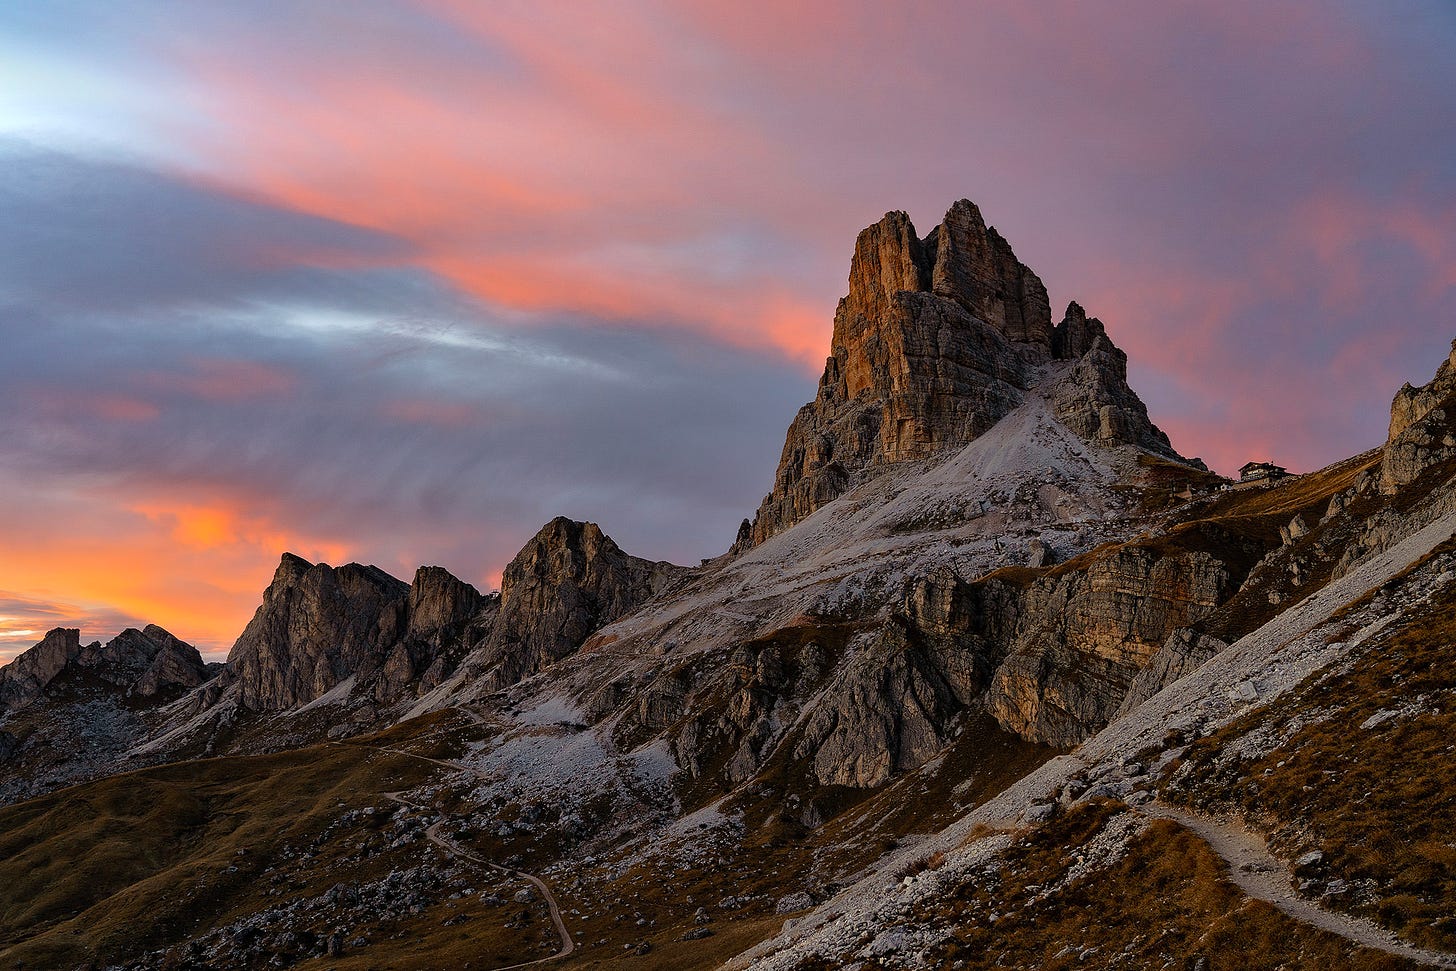 Sunset in the Dolomites, with Rifugio Averau in the background